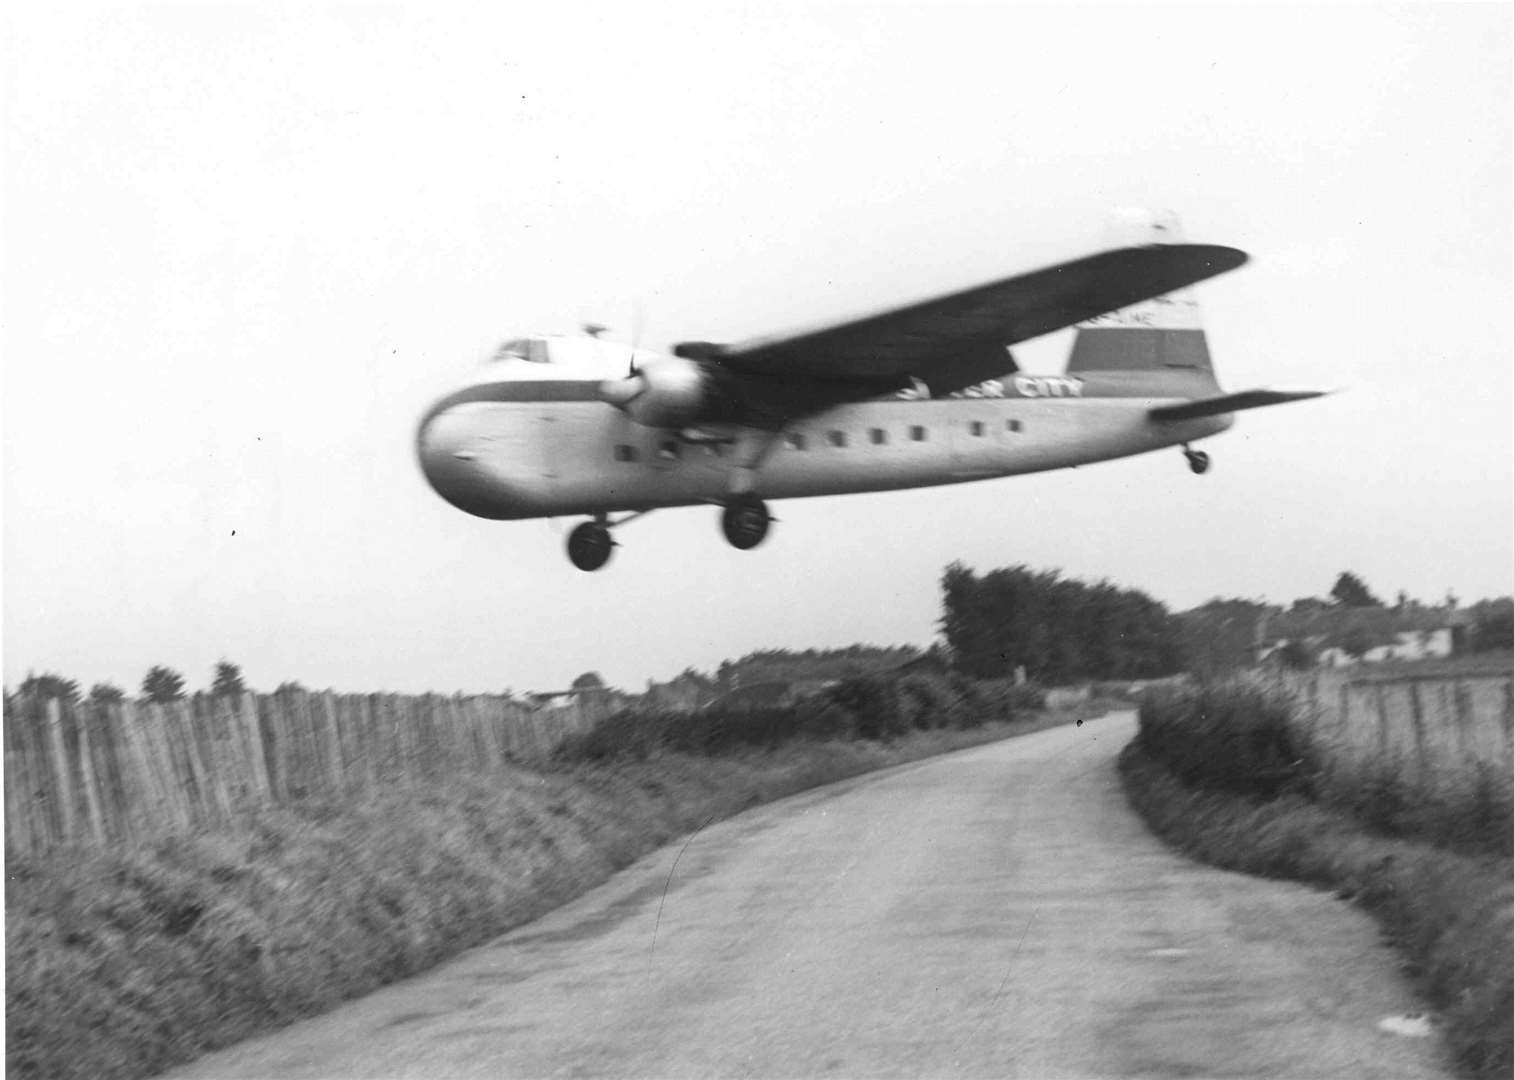 A transport plane flies low over the Roman Road at Lympne, near Hythe, in October 1951. Operating from 1916 to 1984, Lympne Airport was used as a military airfield during the First and Second World Wars. In the 1950s, it ran a coach-air service to Paris and back